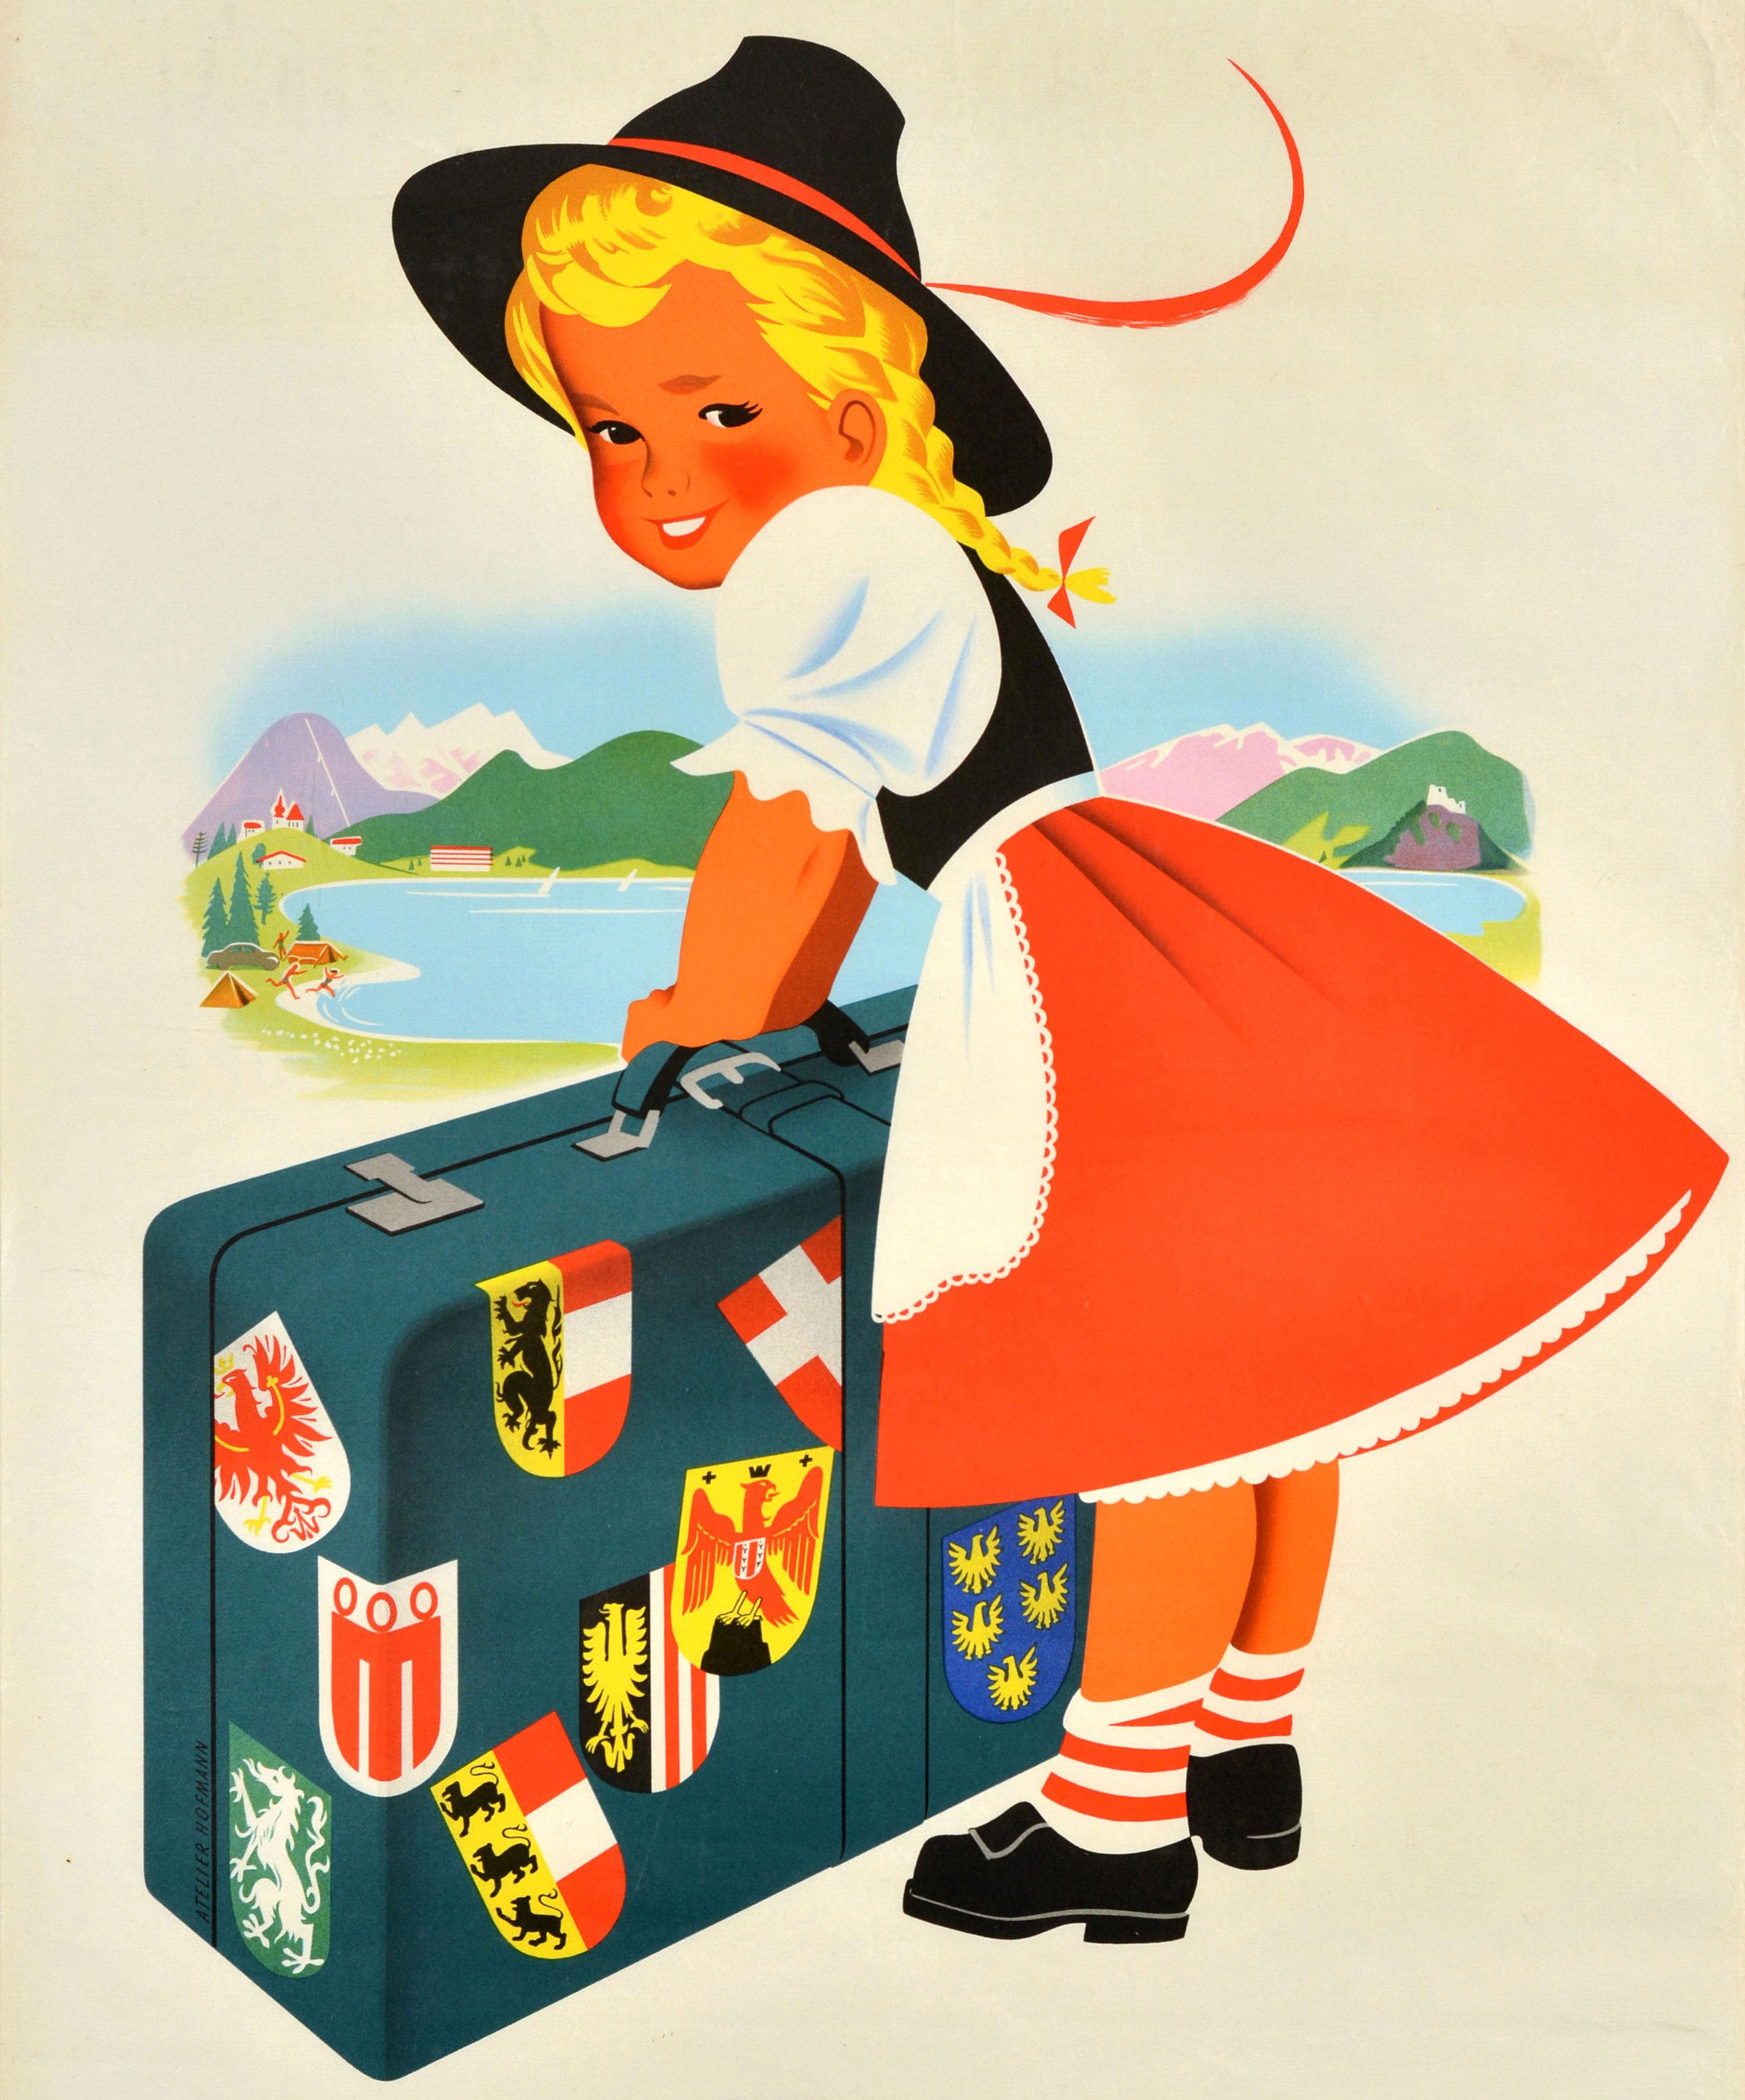 Original vintage travel poster - Travel in Austria - featuring an image of a smiling girl in a traditional dress and hat holding a large suitcase covered in luggage labels showing the various coat of arms of various Austrian states with a scenic